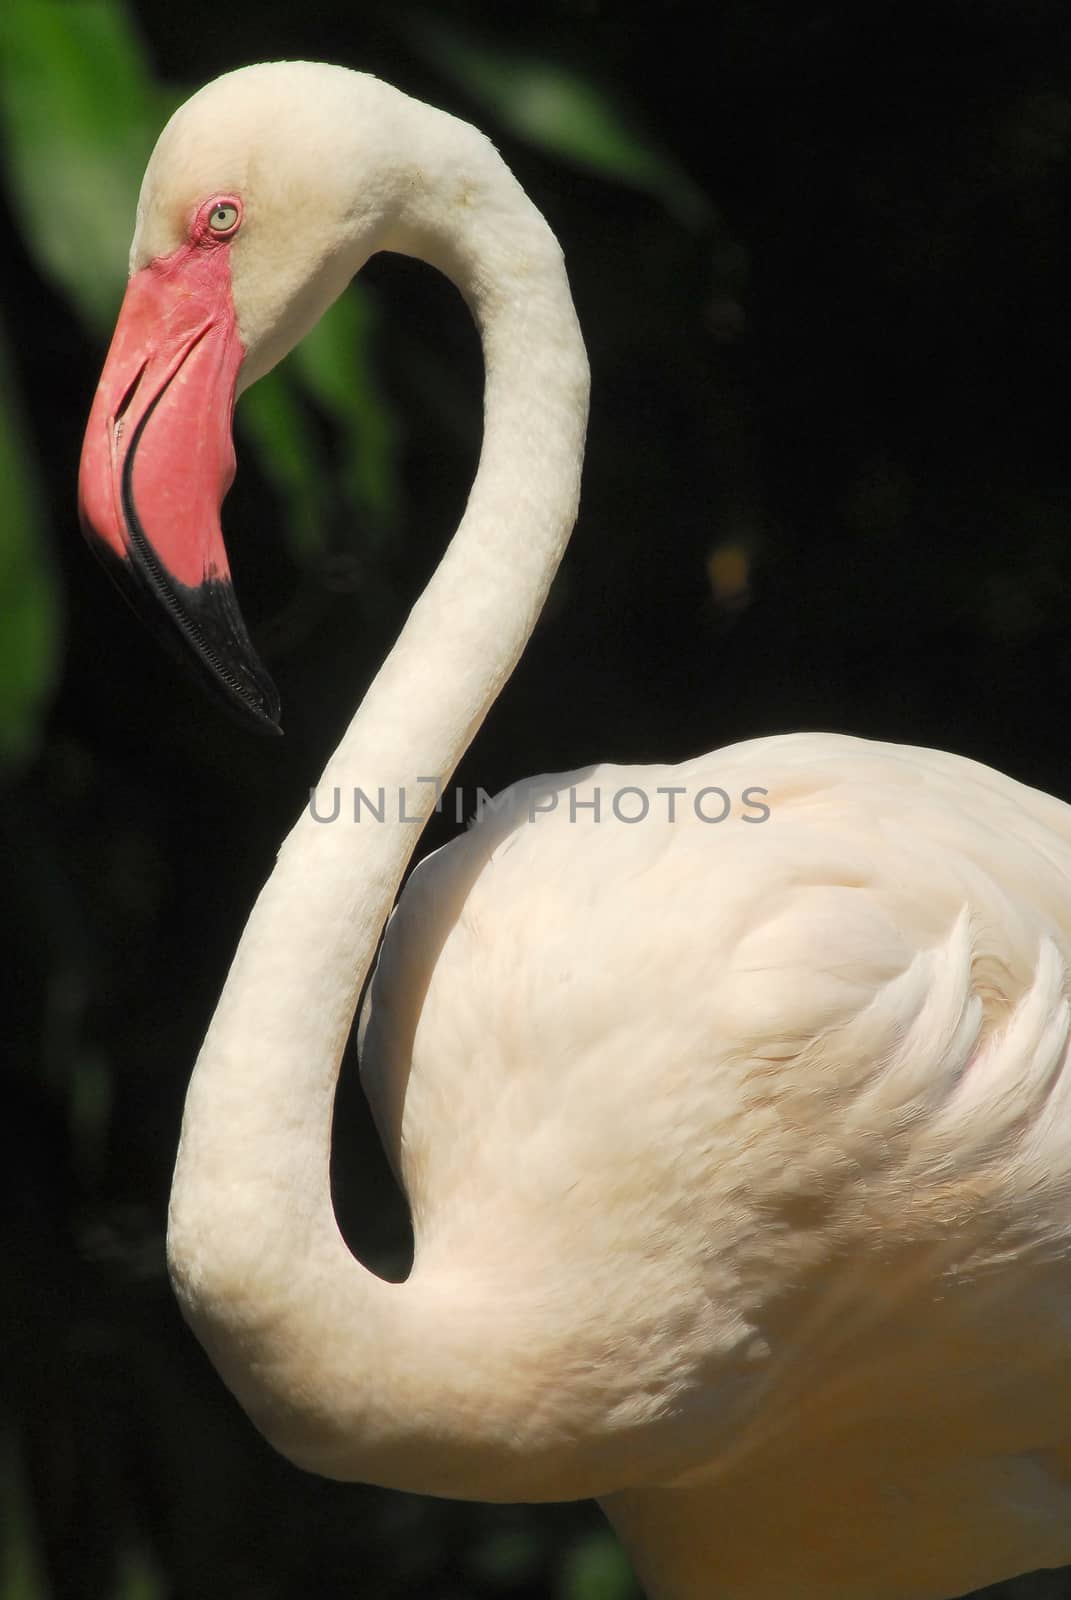 Detail of the head of a pink flamingo by think4photop